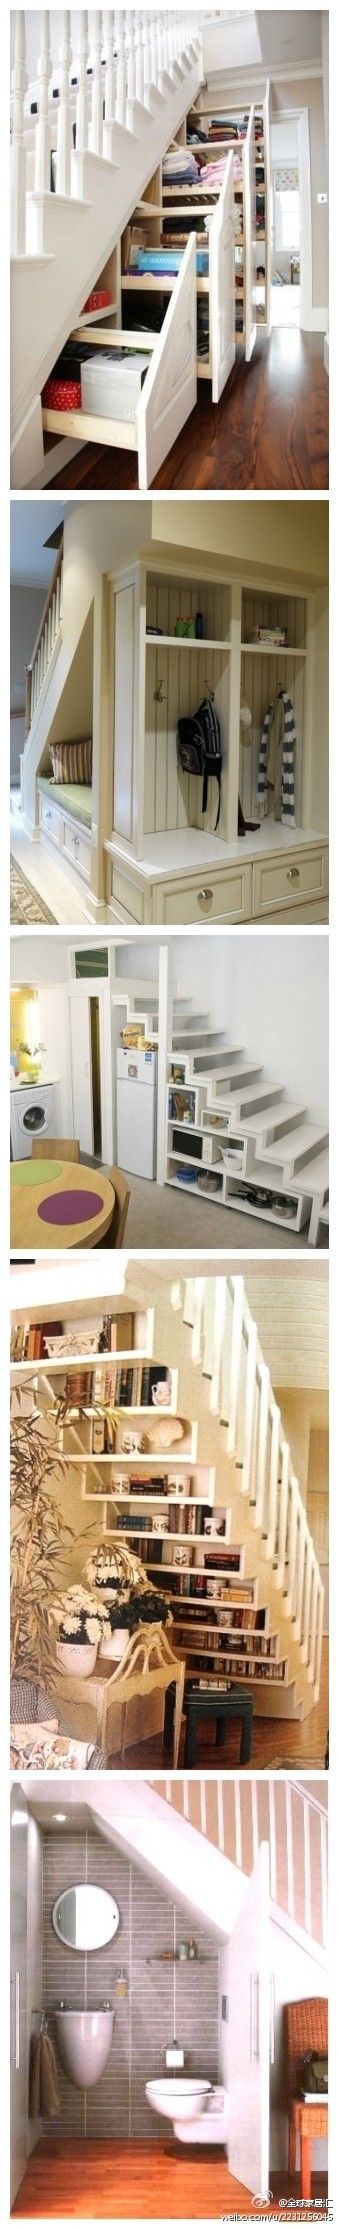 Great ideas to use up traditionally wasted space